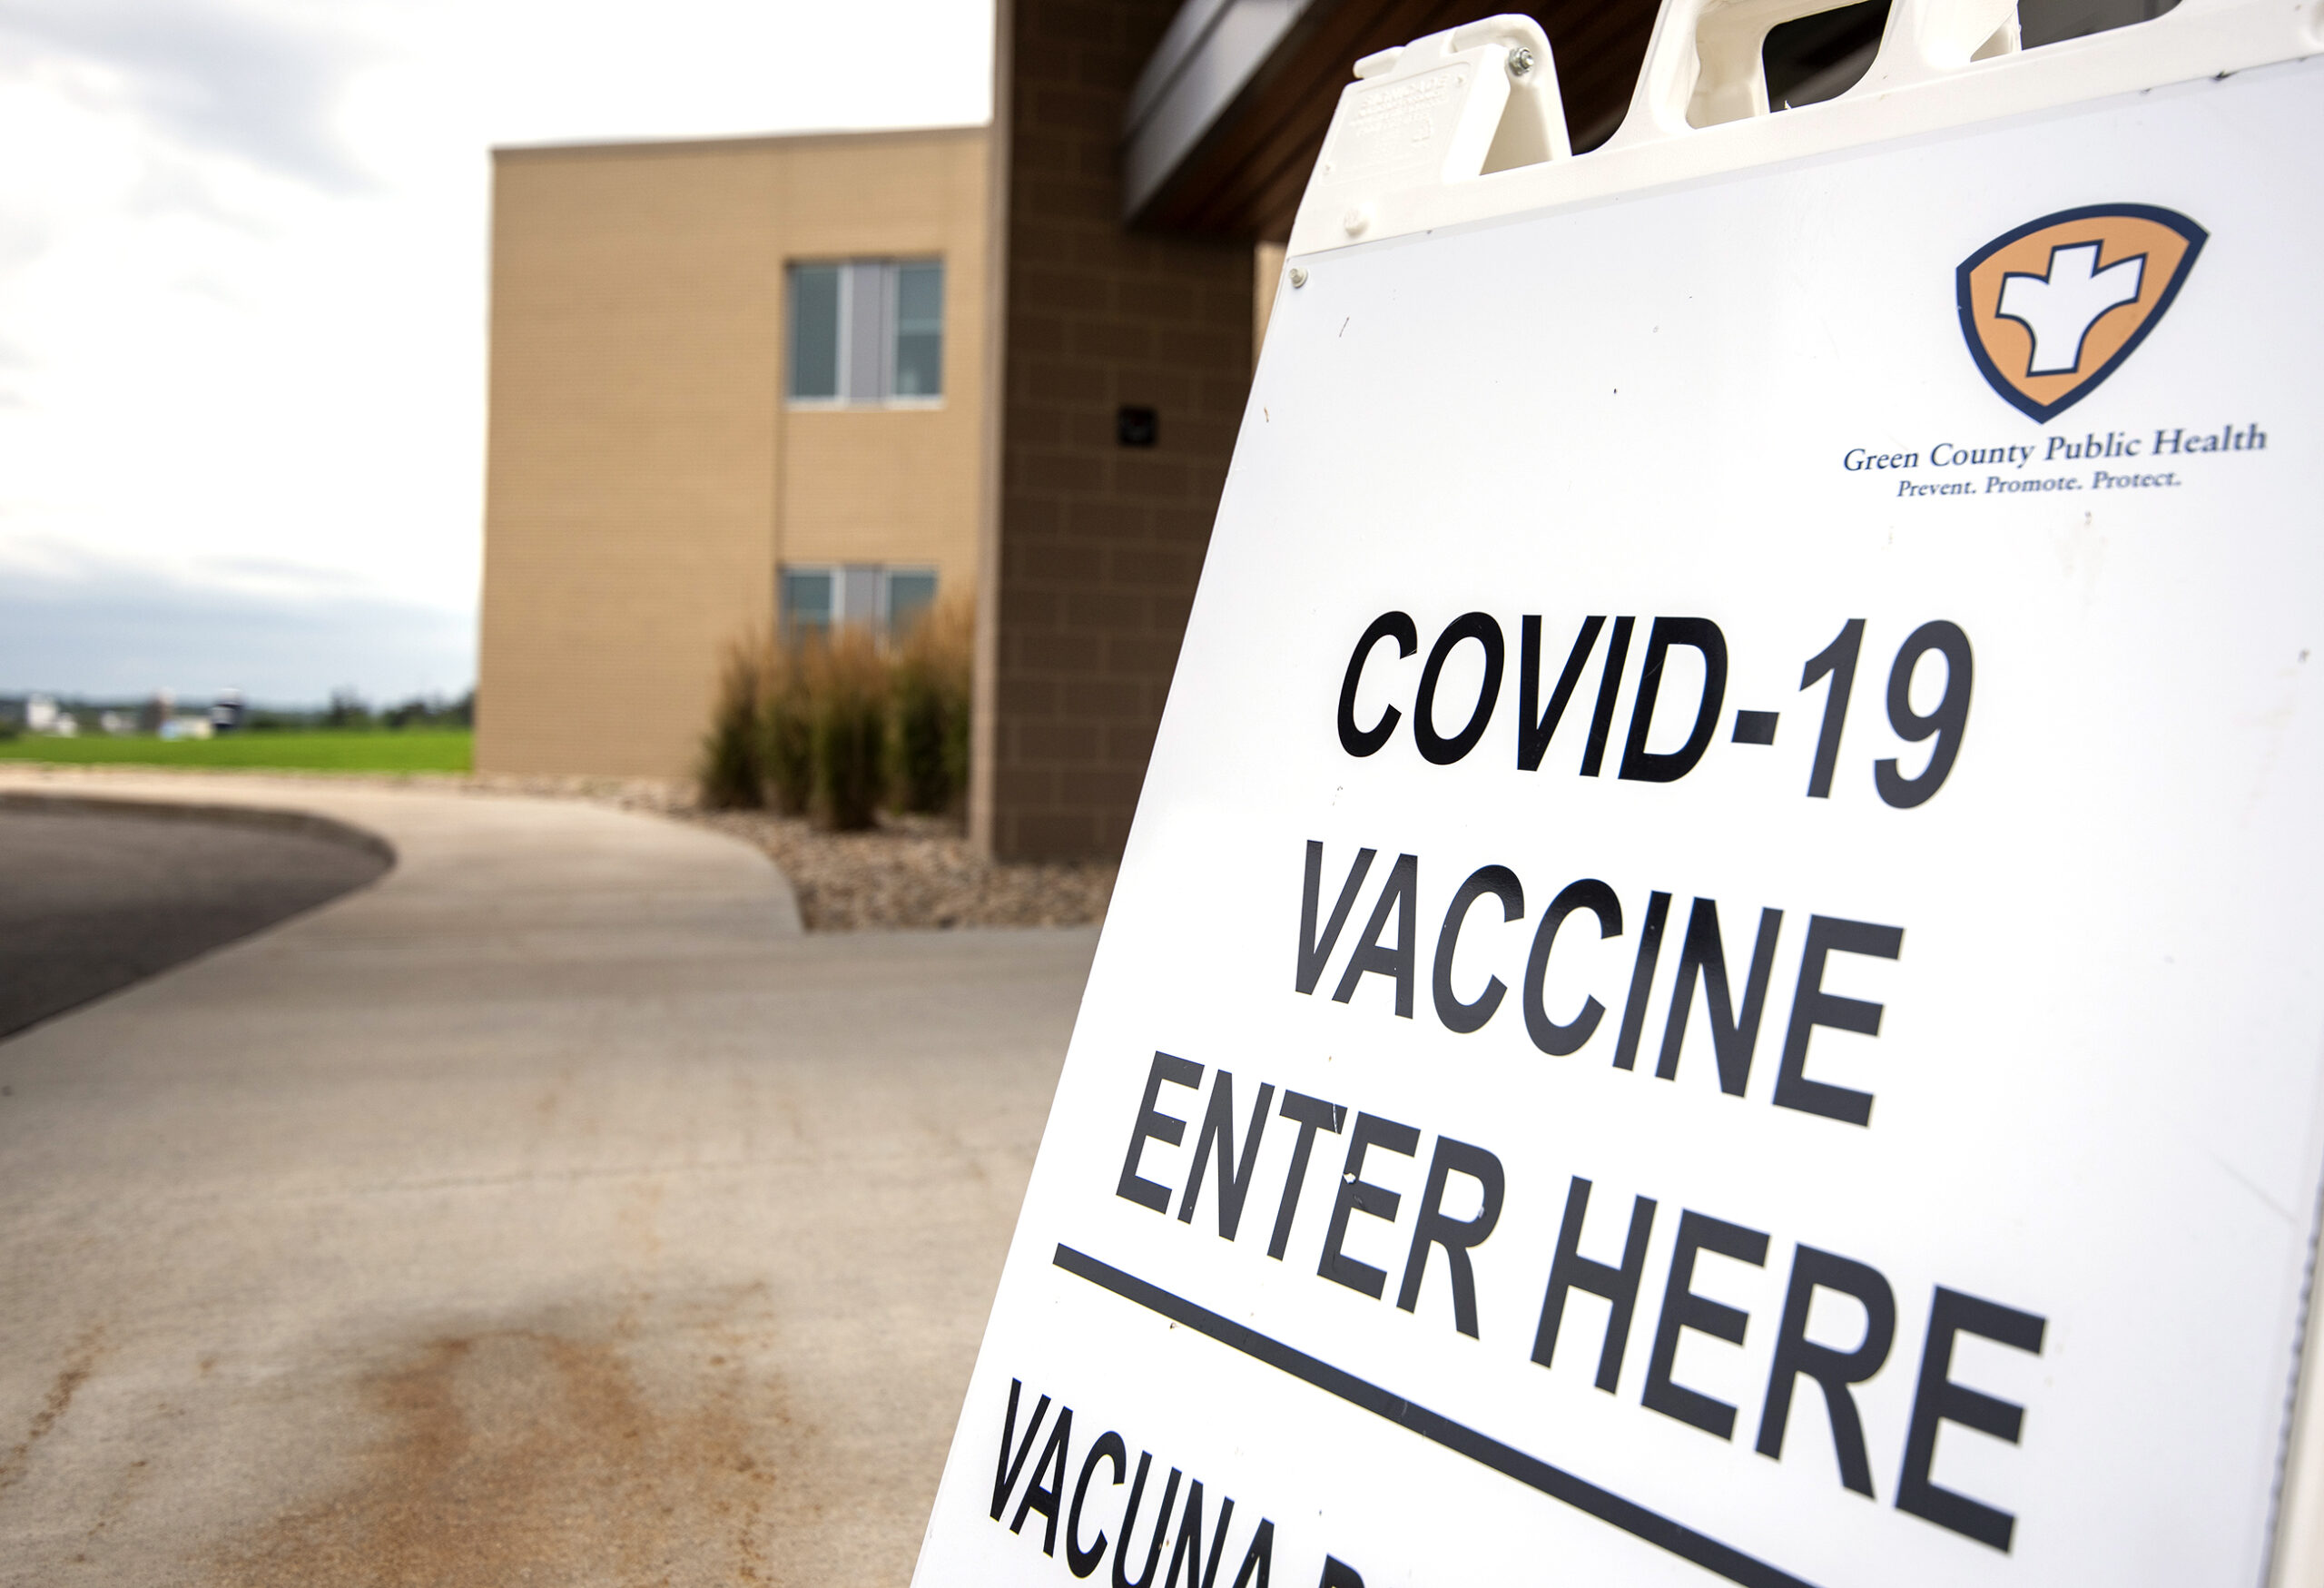 A white sign says "COVID-19 VACCINE ENTER HERE."